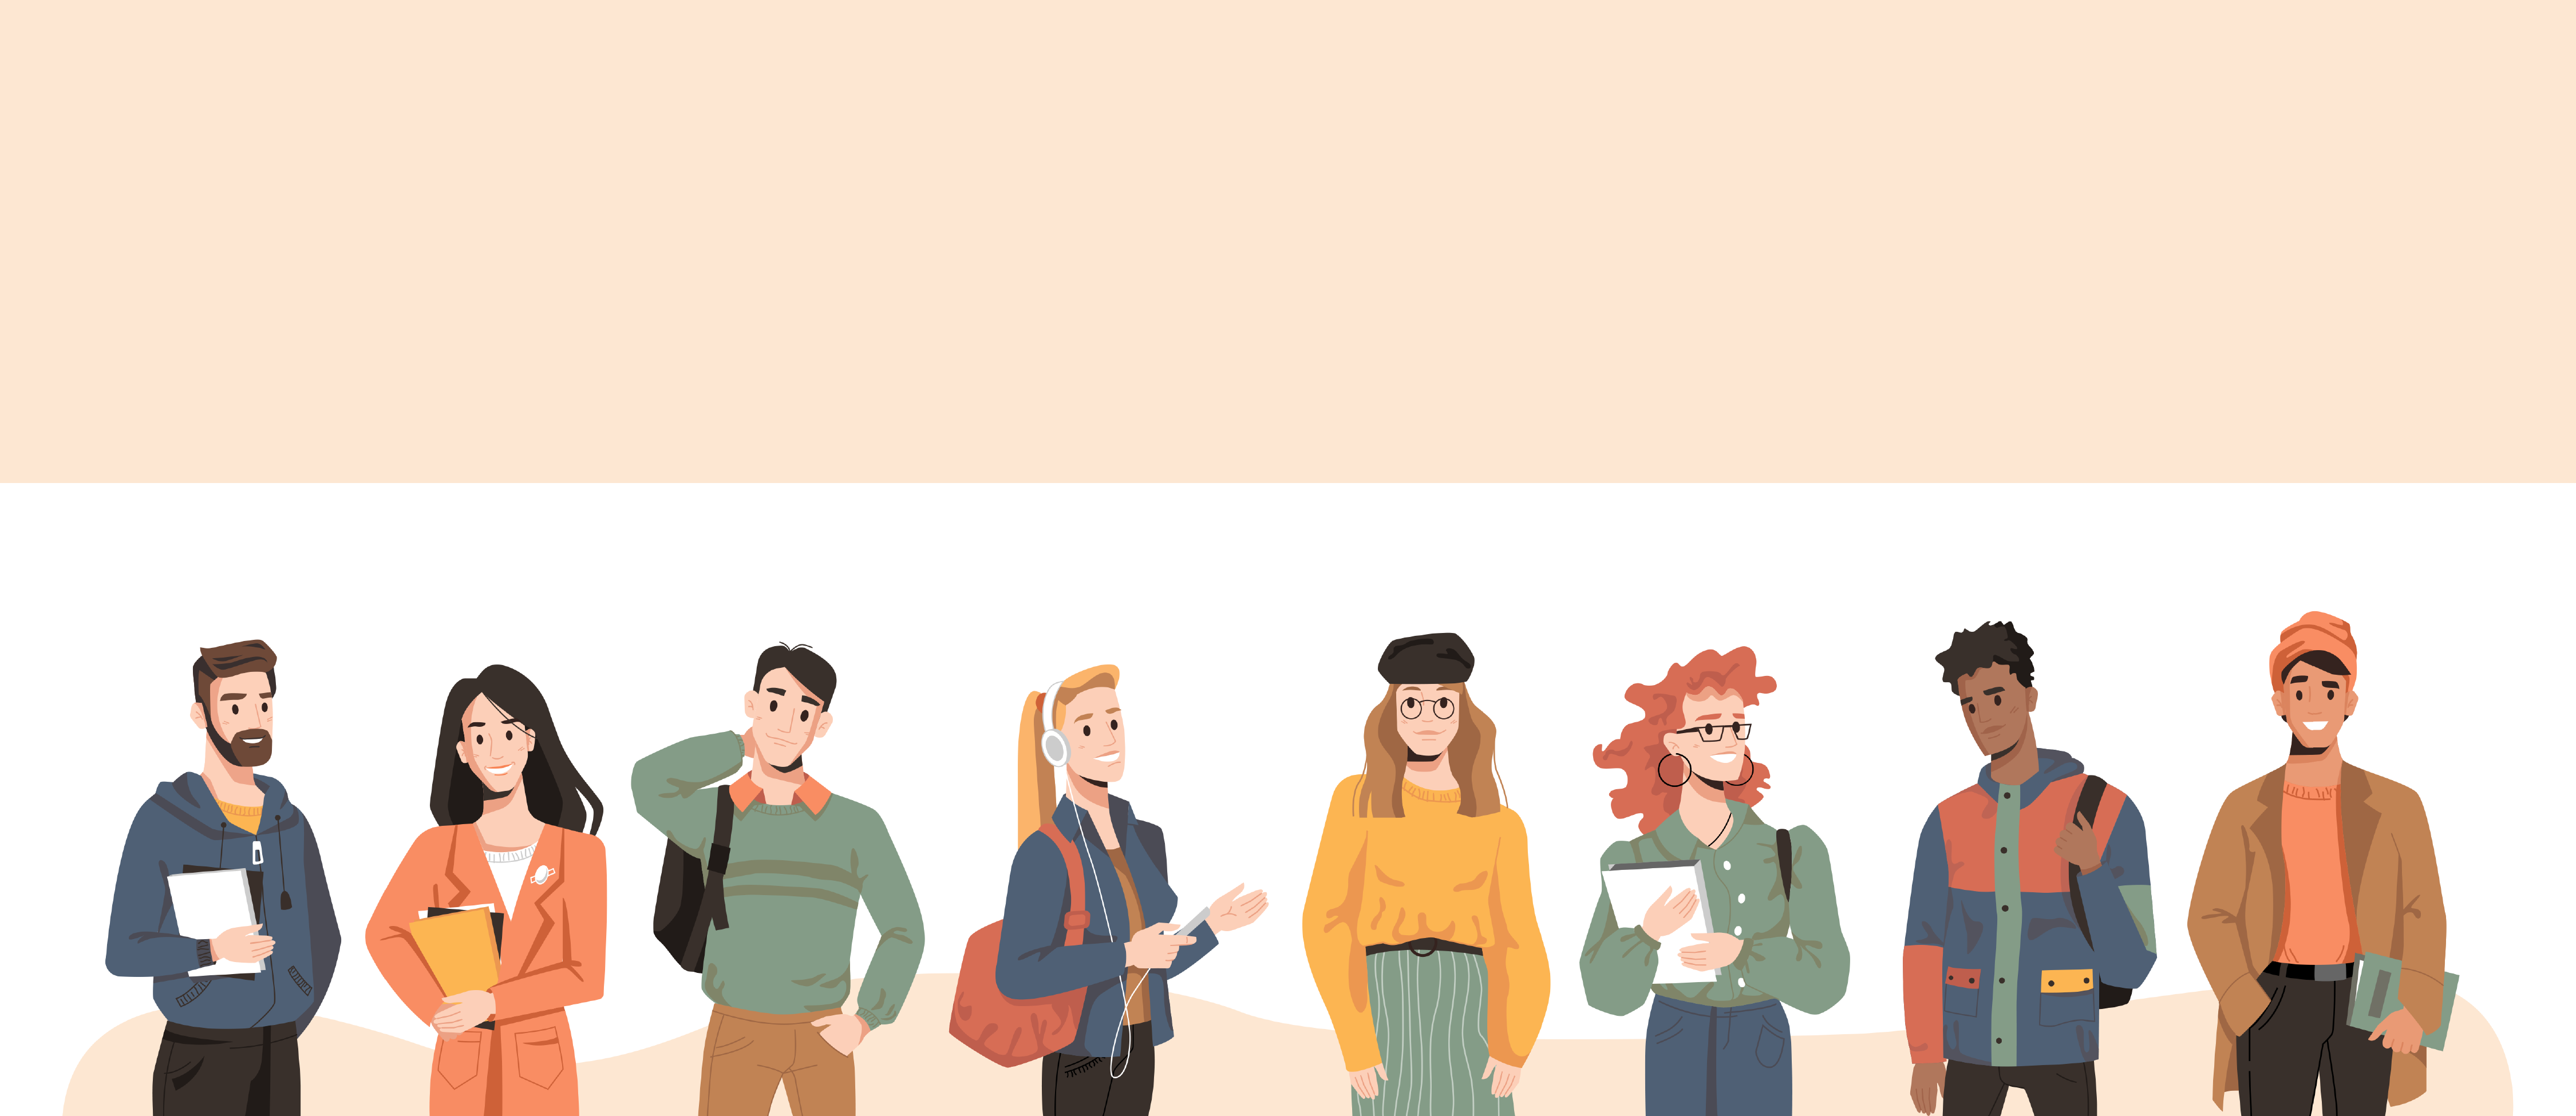 Doodle of 8 young adults in a line